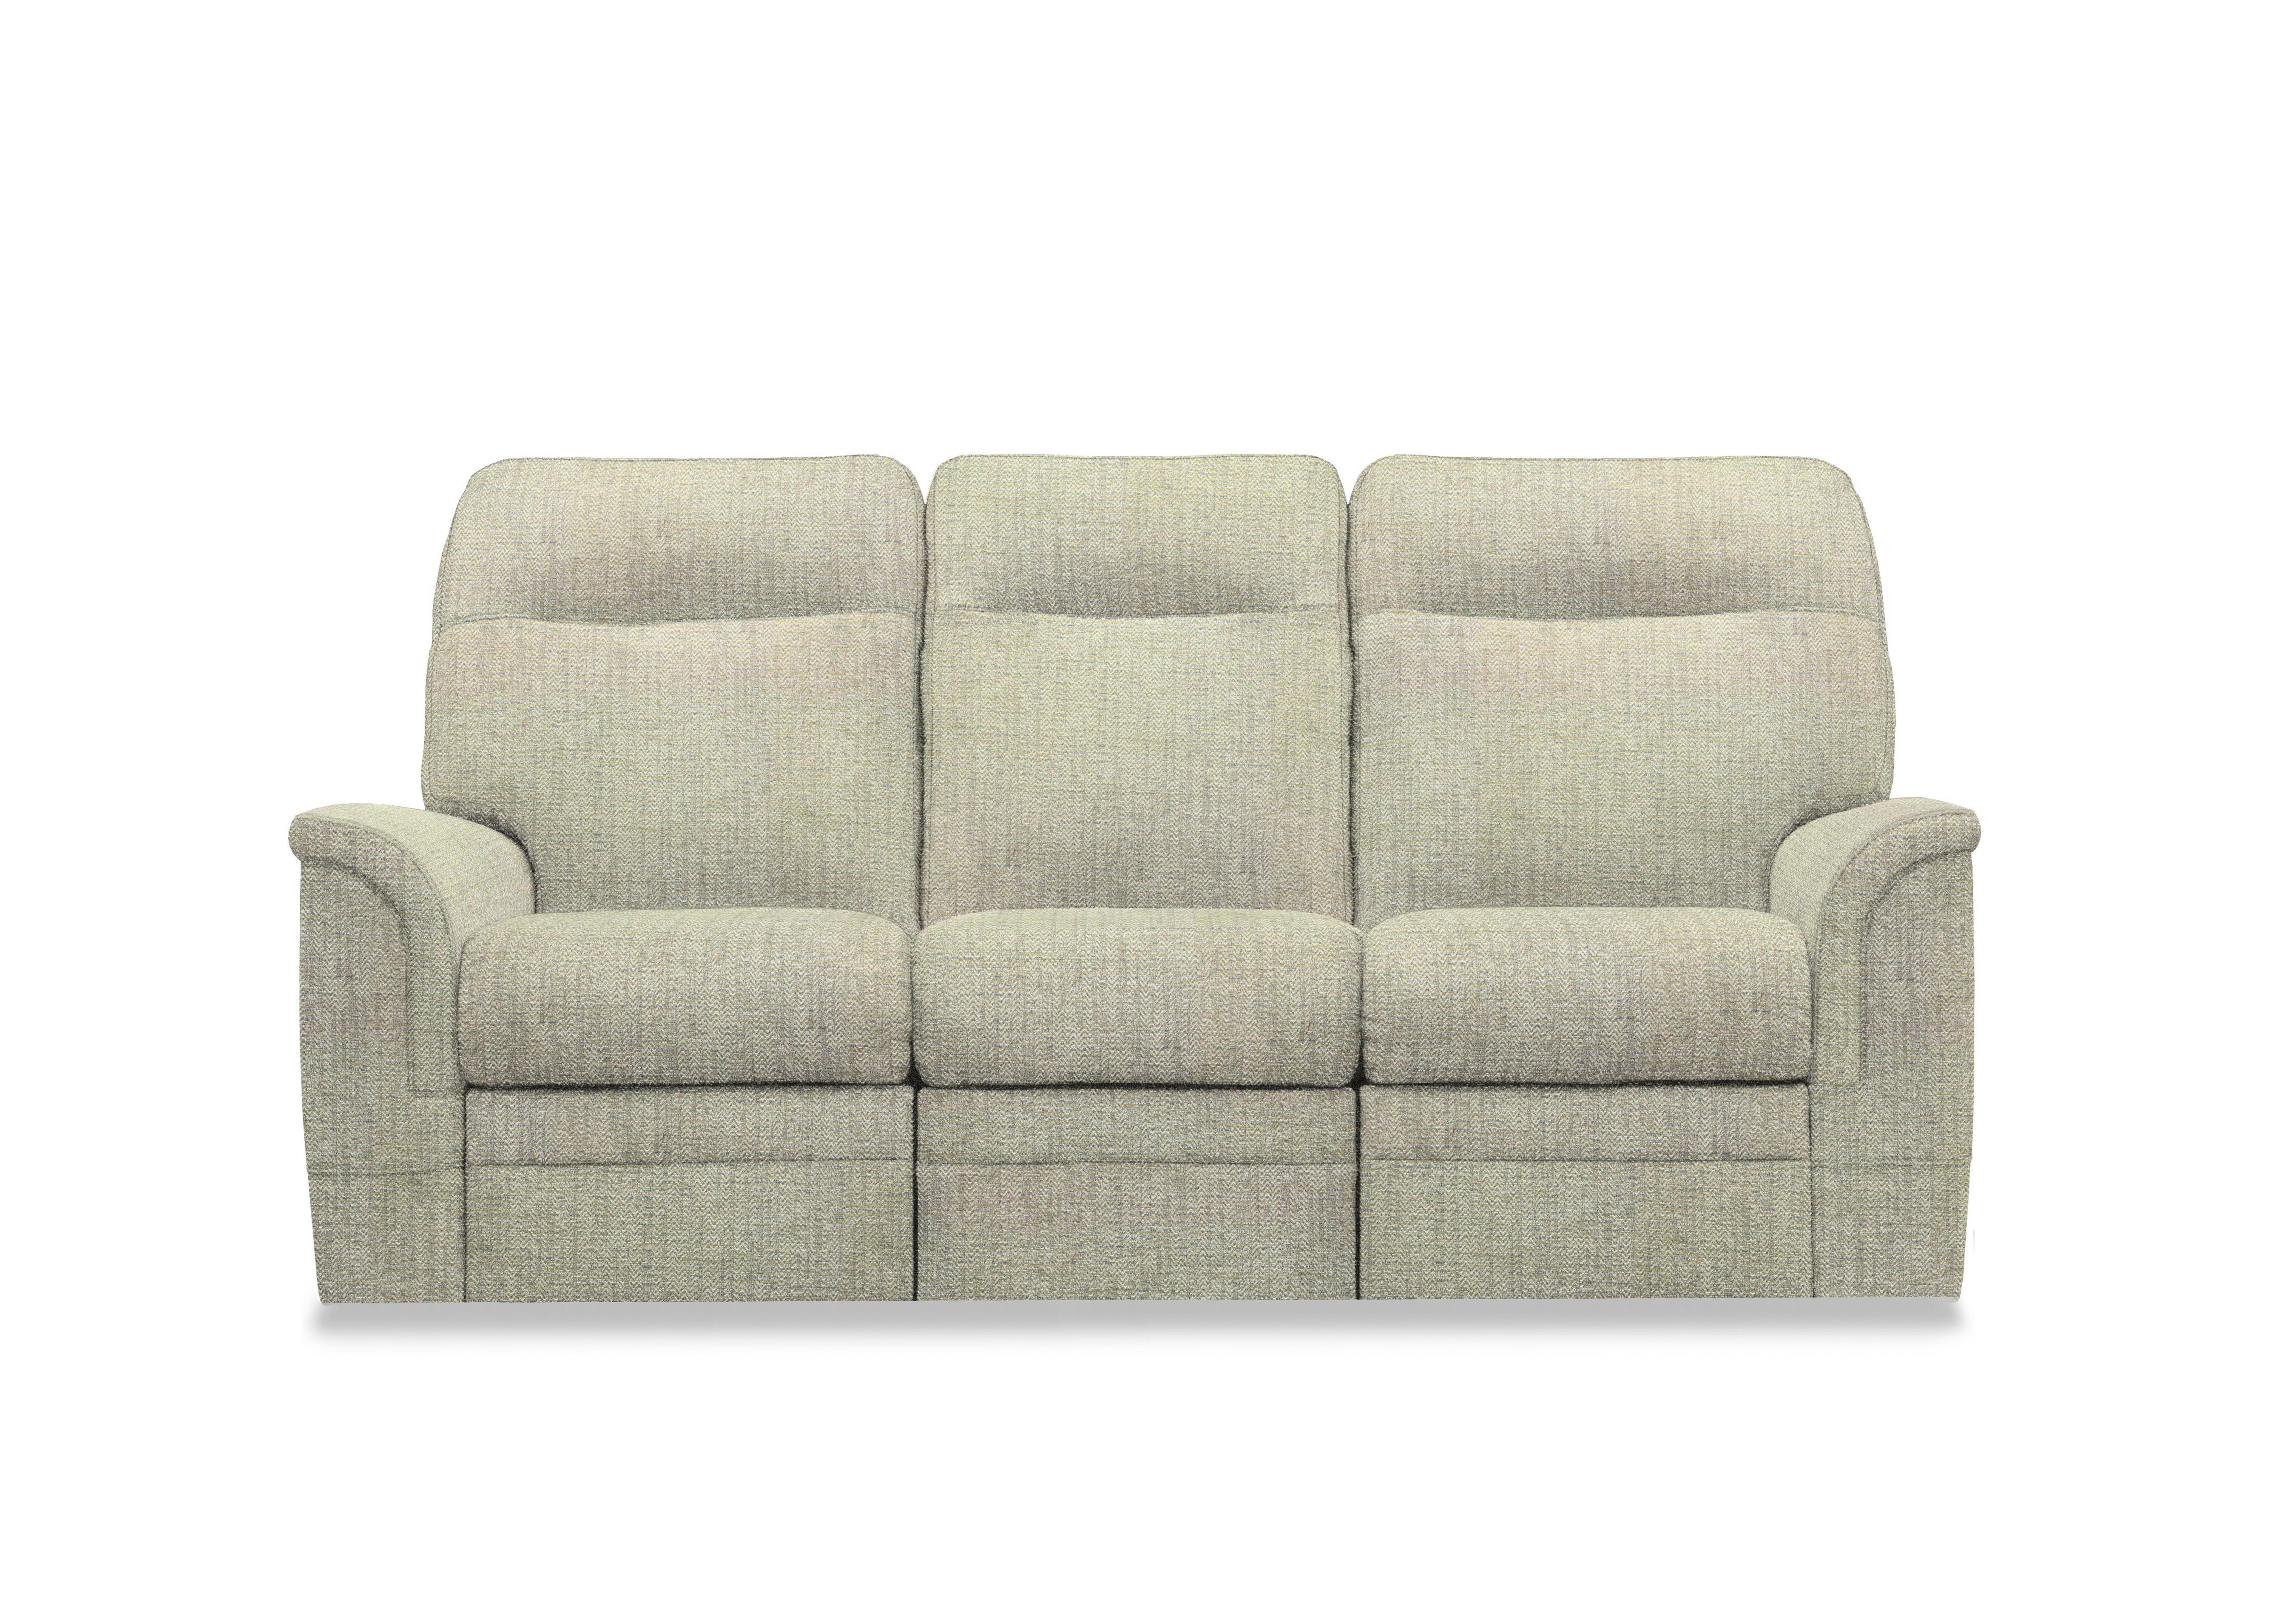 Hudson 23 Fabric 3 Seater Power Recliner Sofa with Power Headrests and Power Lumbar in Cromwell Mint 001355-0069 on Furniture Village